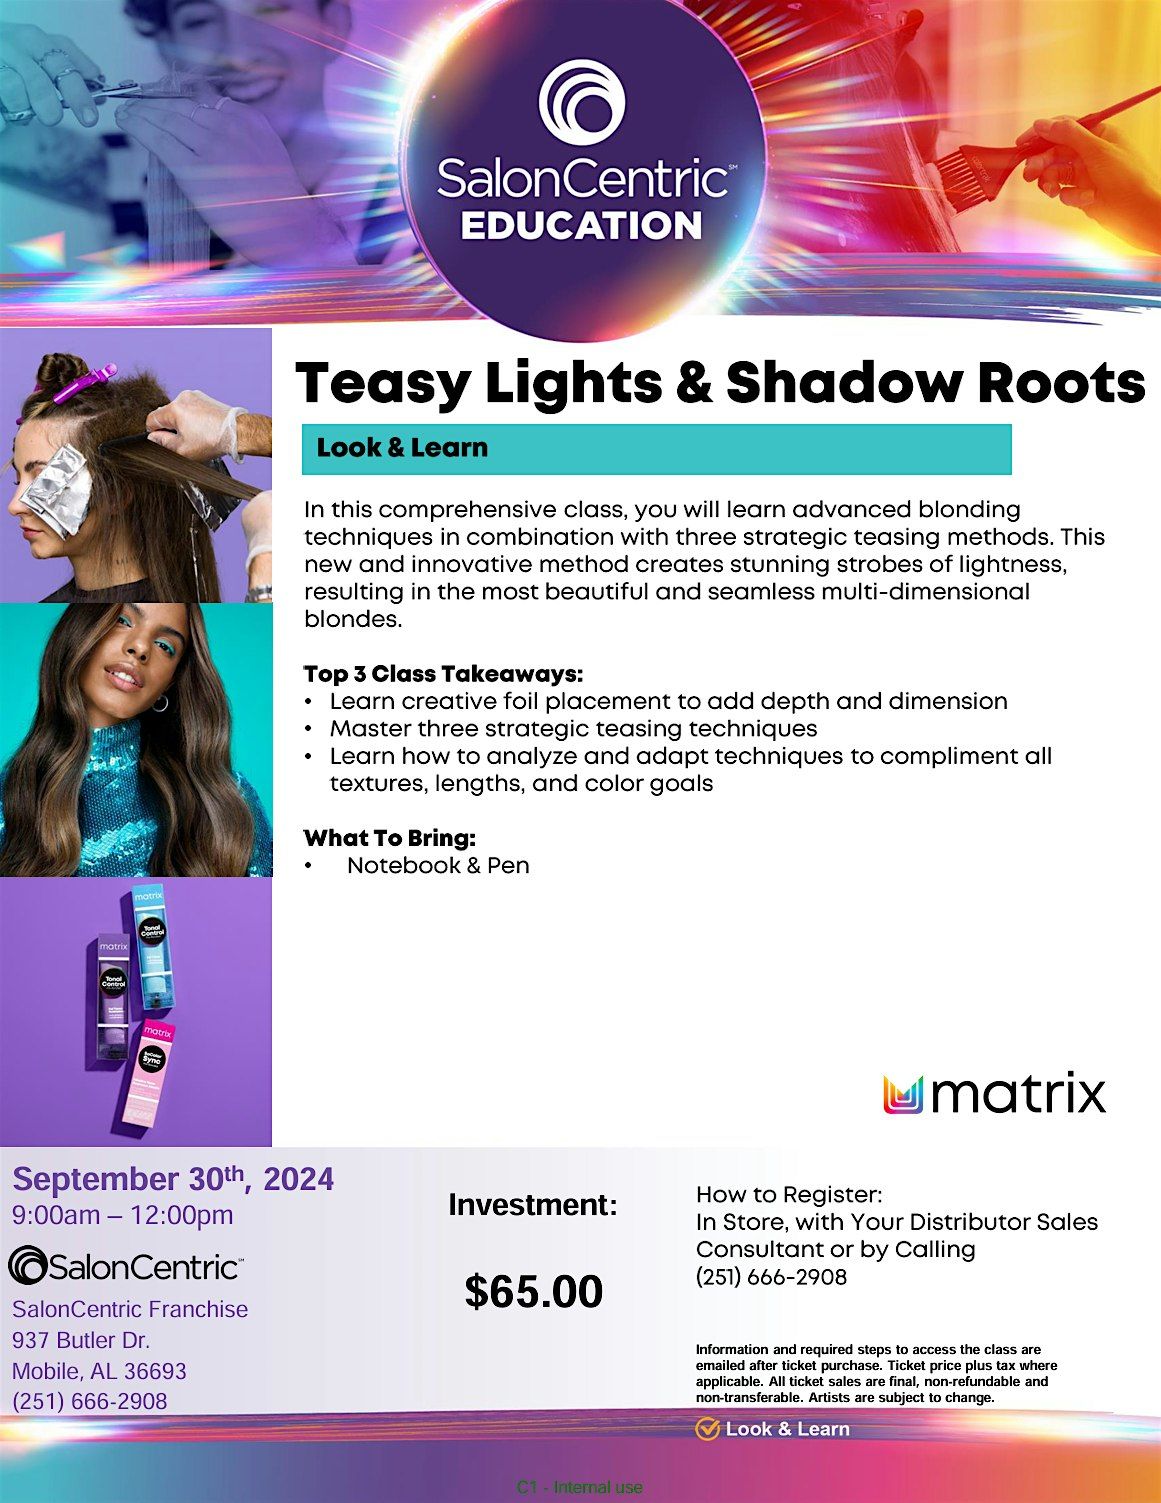 MATRIX TEASY LIGHTS AND SHADOW ROOTS COMING TO MOBILE